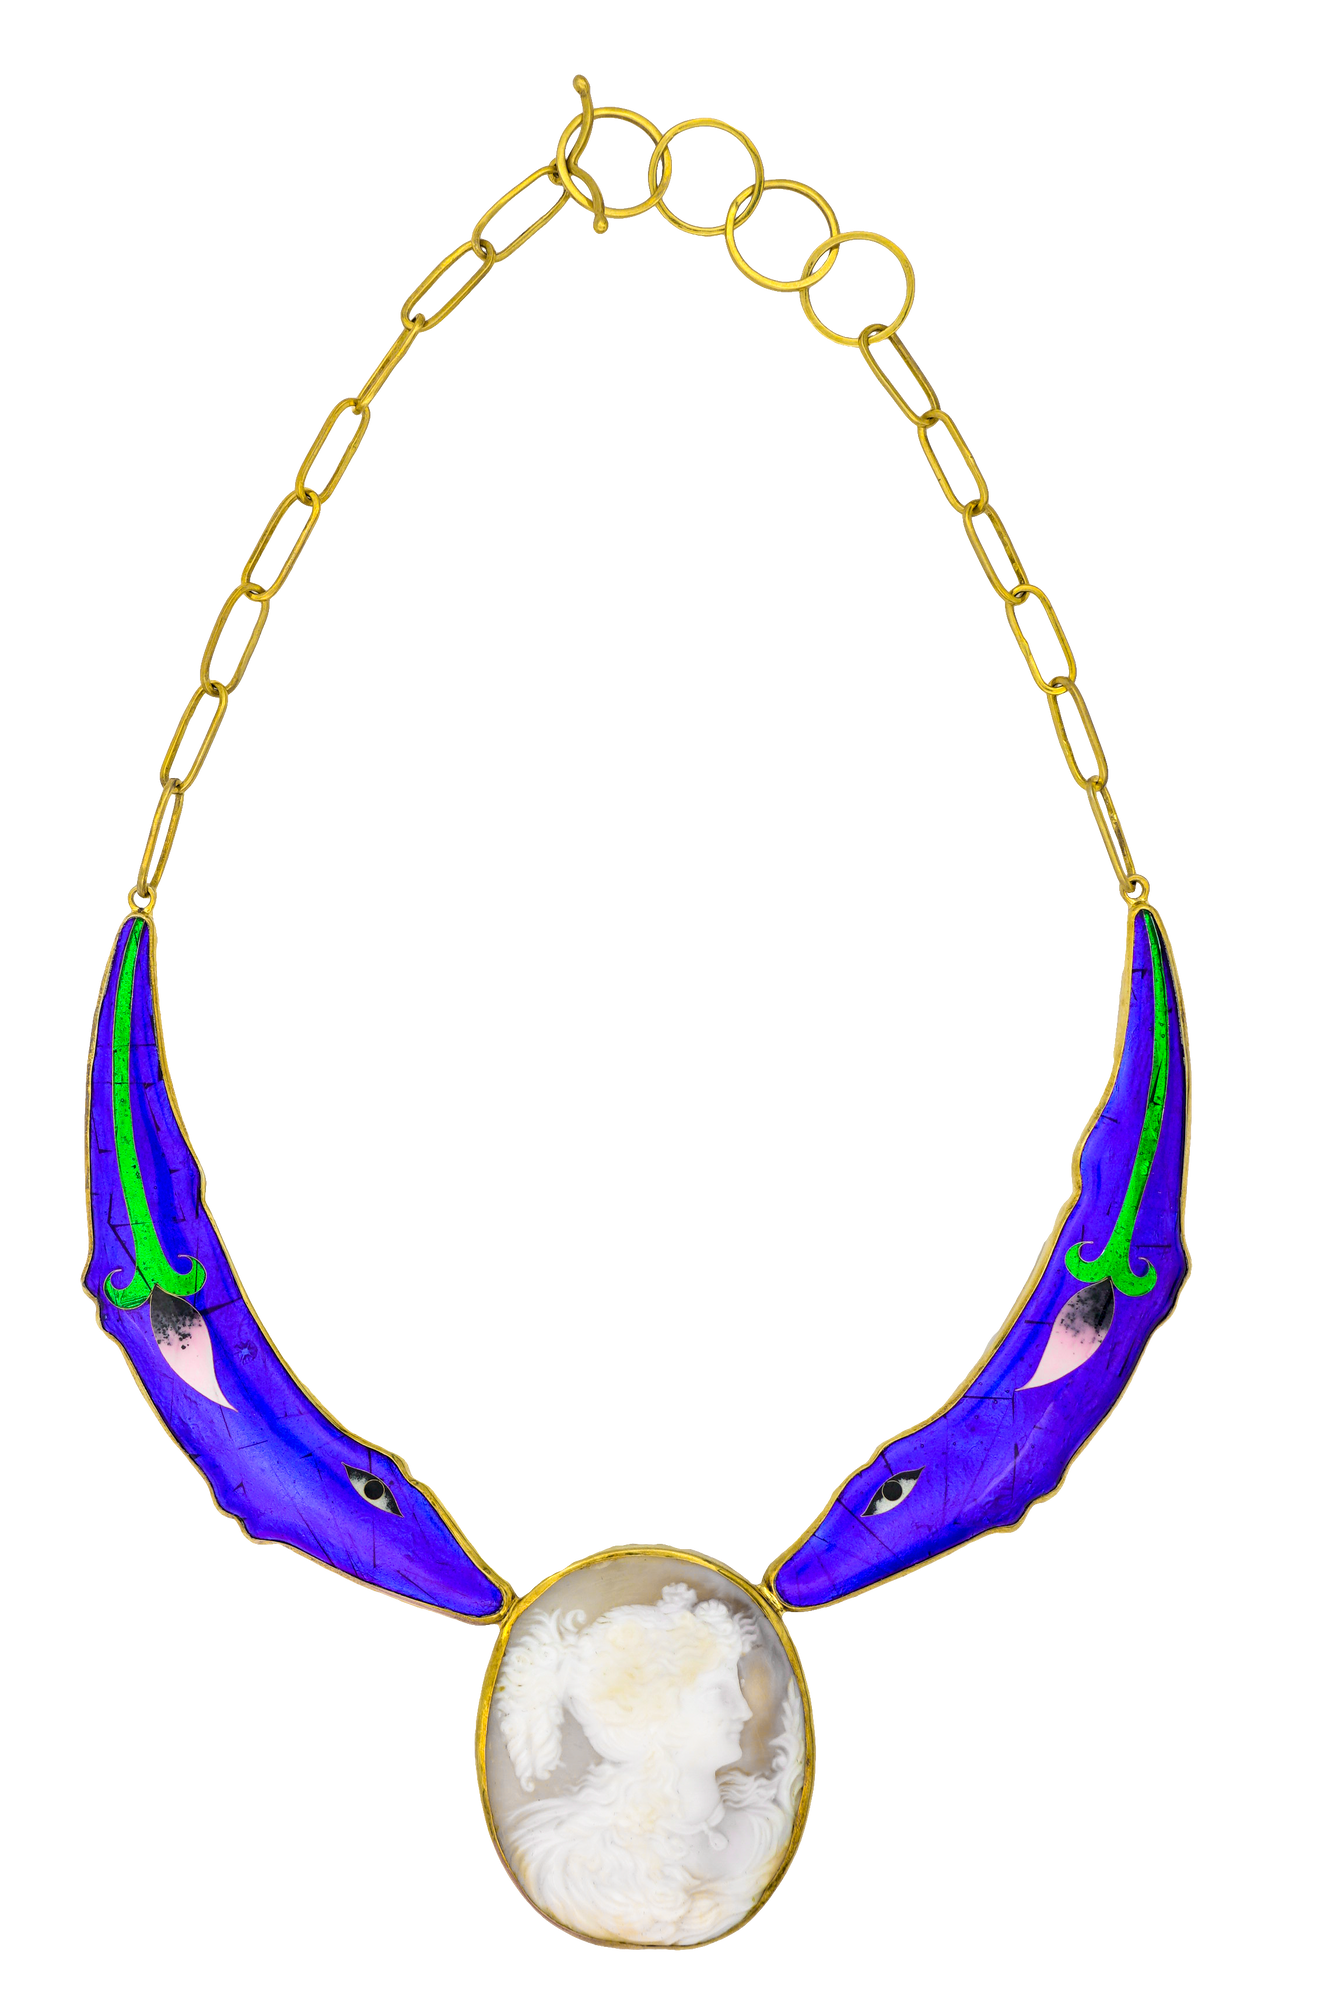 Chain-link necklace with two sapphire blue lizard-like creatures done in the cloisonné enamelling technique with a green stemmed, pink petaled flower on each. They are arranged to face a Cameo profile of an elegant figure in white on a beige cloudy backdrop – all outlined in fine gold metal.